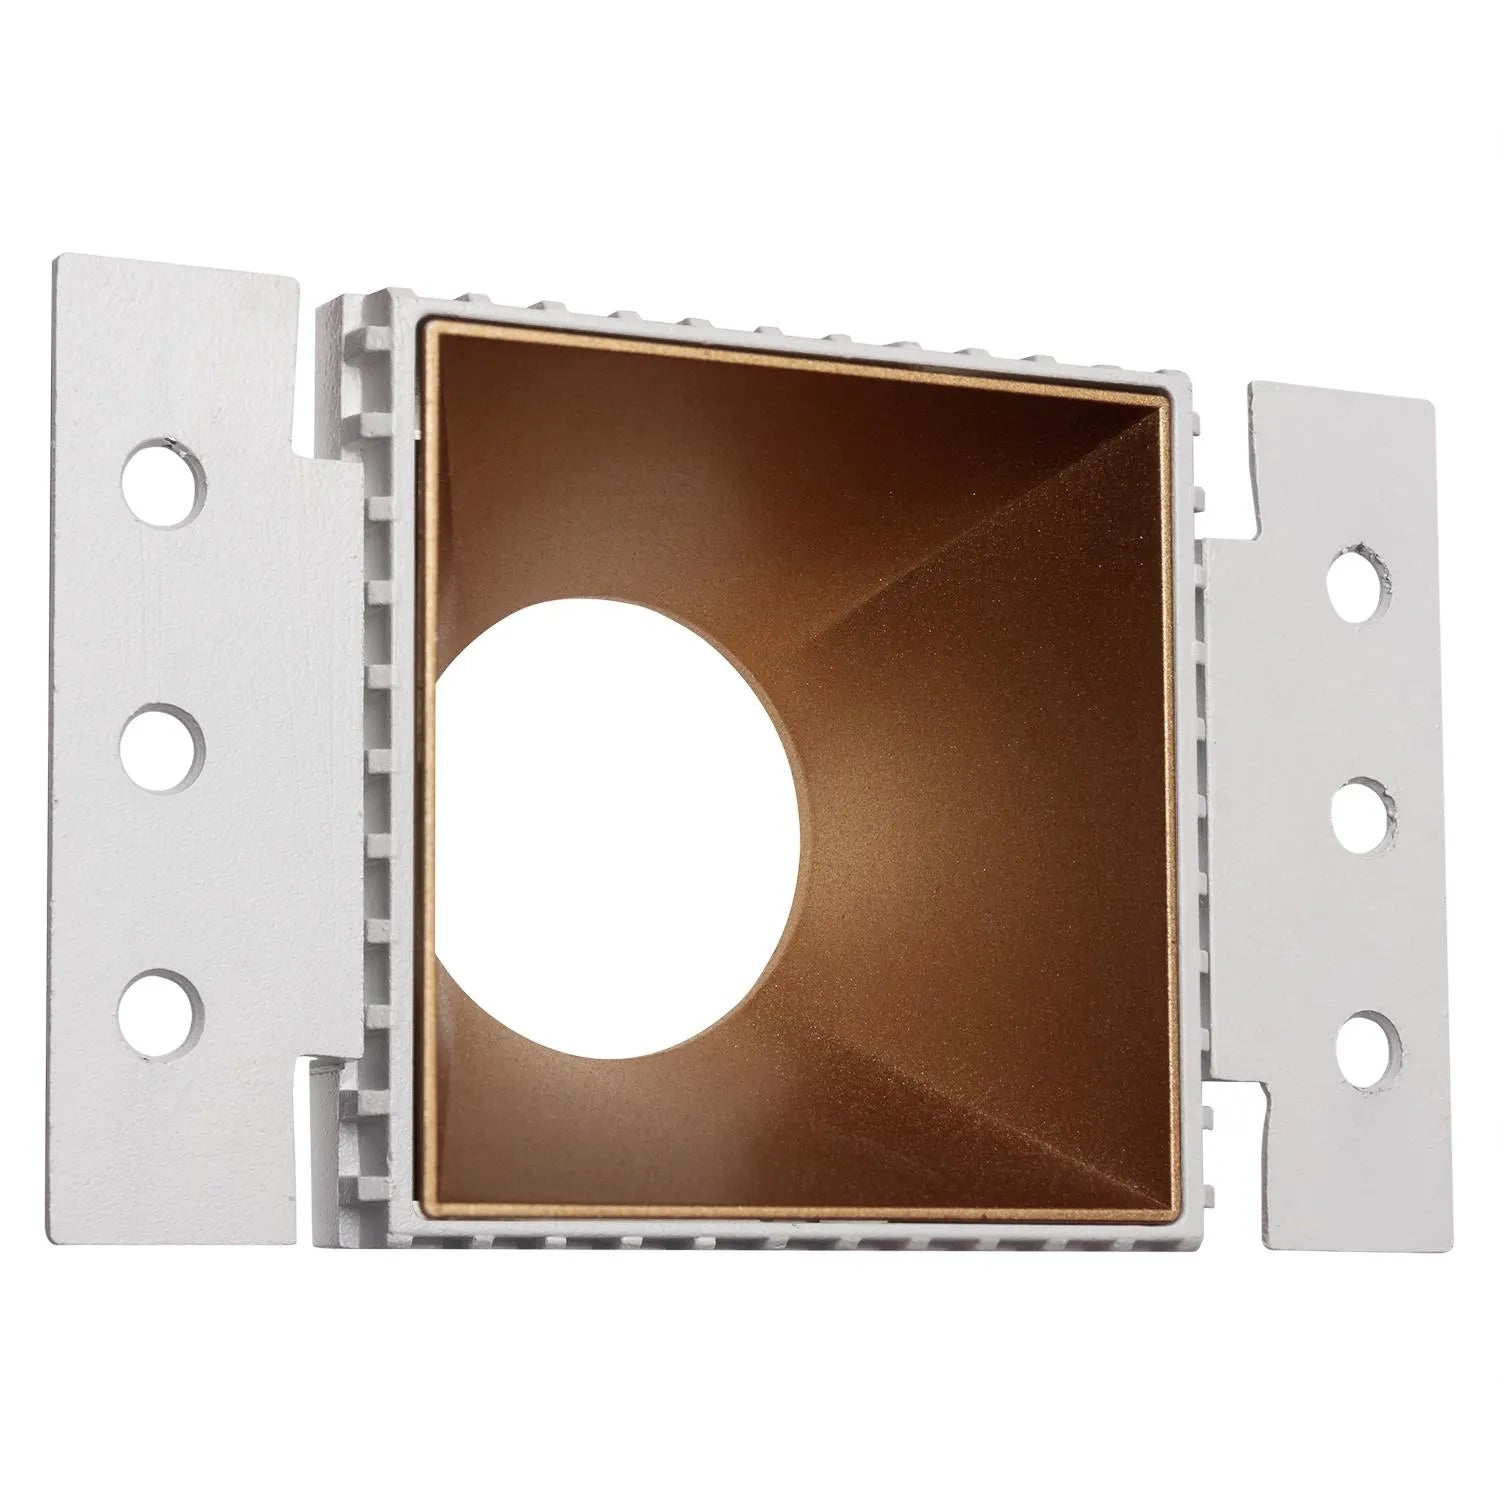 Westgate LRD-TL-10W-30K-4S-MG LED 4" Round Architectural Trimless Recessed Light Residential Lighting - Matte Gold